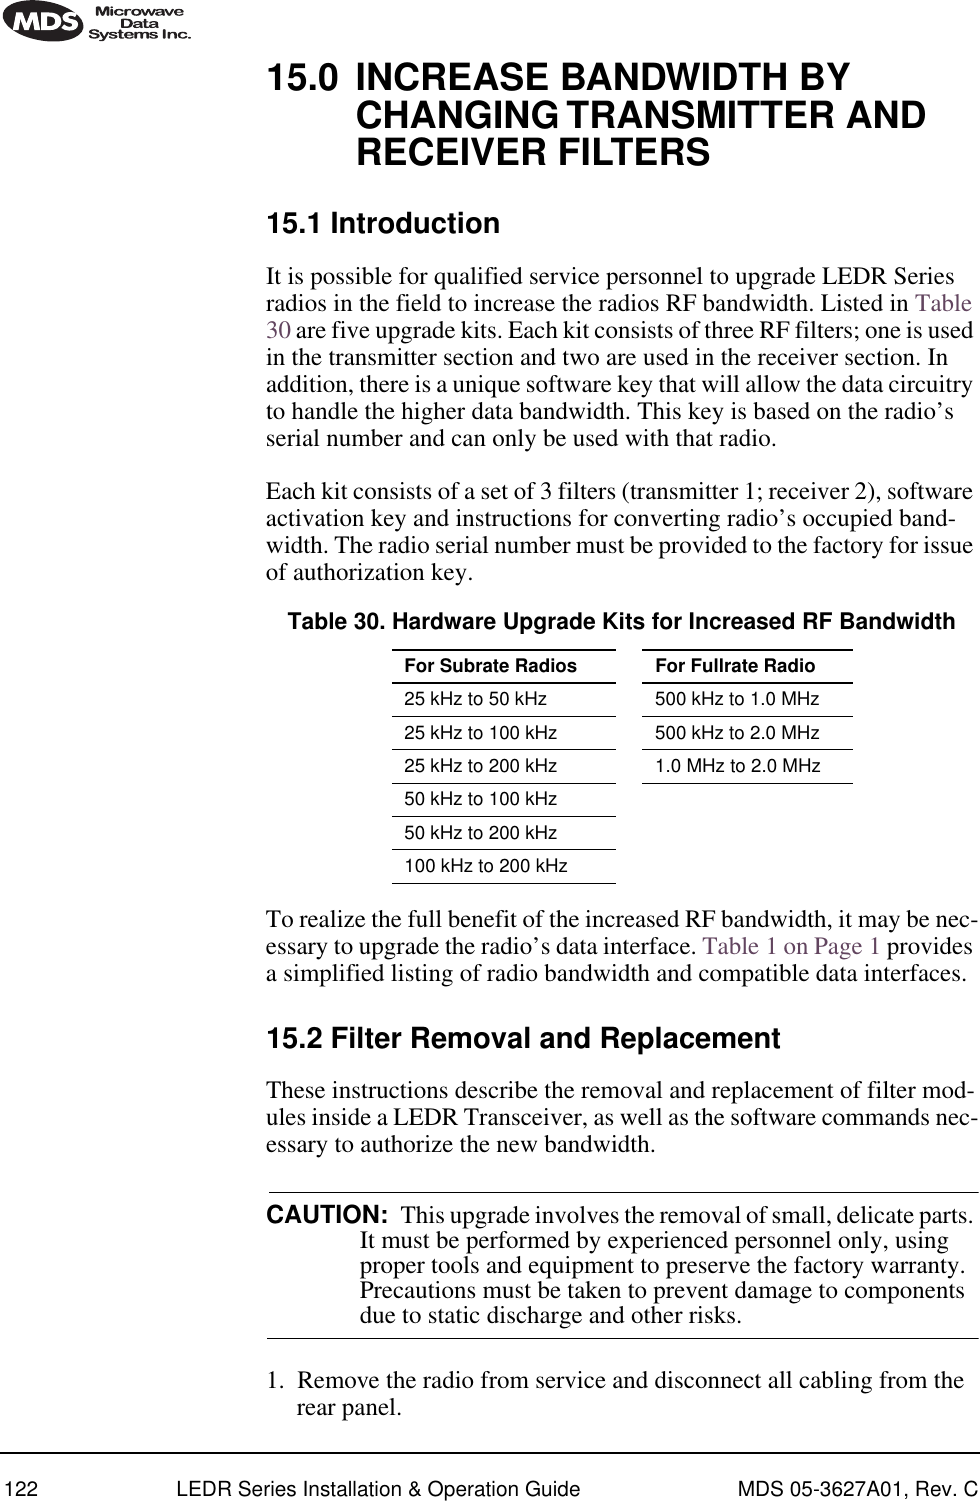 122 LEDR Series Installation &amp; Operation Guide MDS 05-3627A01, Rev. C15.0 INCREASE BANDWIDTH BY CHANGING TRANSMITTER AND RECEIVER FILTERS15.1 IntroductionIt is possible for qualified service personnel to upgrade LEDR Series radios in the field to increase the radios RF bandwidth. Listed in Table 30 are five upgrade kits. Each kit consists of three RF filters; one is used in the transmitter section and two are used in the receiver section. In addition, there is a unique software key that will allow the data circuitry to handle the higher data bandwidth. This key is based on the radio’s serial number and can only be used with that radio.Each kit consists of a set of 3 filters (transmitter 1; receiver 2), software activation key and instructions for converting radio’s occupied band-width. The radio serial number must be provided to the factory for issue of authorization key.To realize the full benefit of the increased RF bandwidth, it may be nec-essary to upgrade the radio’s data interface. Table 1 on Page 1 provides a simplified listing of radio bandwidth and compatible data interfaces.15.2 Filter Removal and ReplacementThese instructions describe the removal and replacement of filter mod-ules inside a LEDR Transceiver, as well as the software commands nec-essary to authorize the new bandwidth.CAUTION:  This upgrade involves the removal of small, delicate parts. It must be performed by experienced personnel only, using proper tools and equipment to preserve the factory warranty. Precautions must be taken to prevent damage to components due to static discharge and other risks.1. Remove the radio from service and disconnect all cabling from the rear panel.Table 30. Hardware Upgrade Kits for Increased RF BandwidthFor Subrate Radios For Fullrate Radio25 kHz to 50 kHz 500 kHz to 1.0 MHz25 kHz to 100 kHz 500 kHz to 2.0 MHz25 kHz to 200 kHz 1.0 MHz to 2.0 MHz50 kHz to 100 kHz50 kHz to 200 kHz100 kHz to 200 kHz